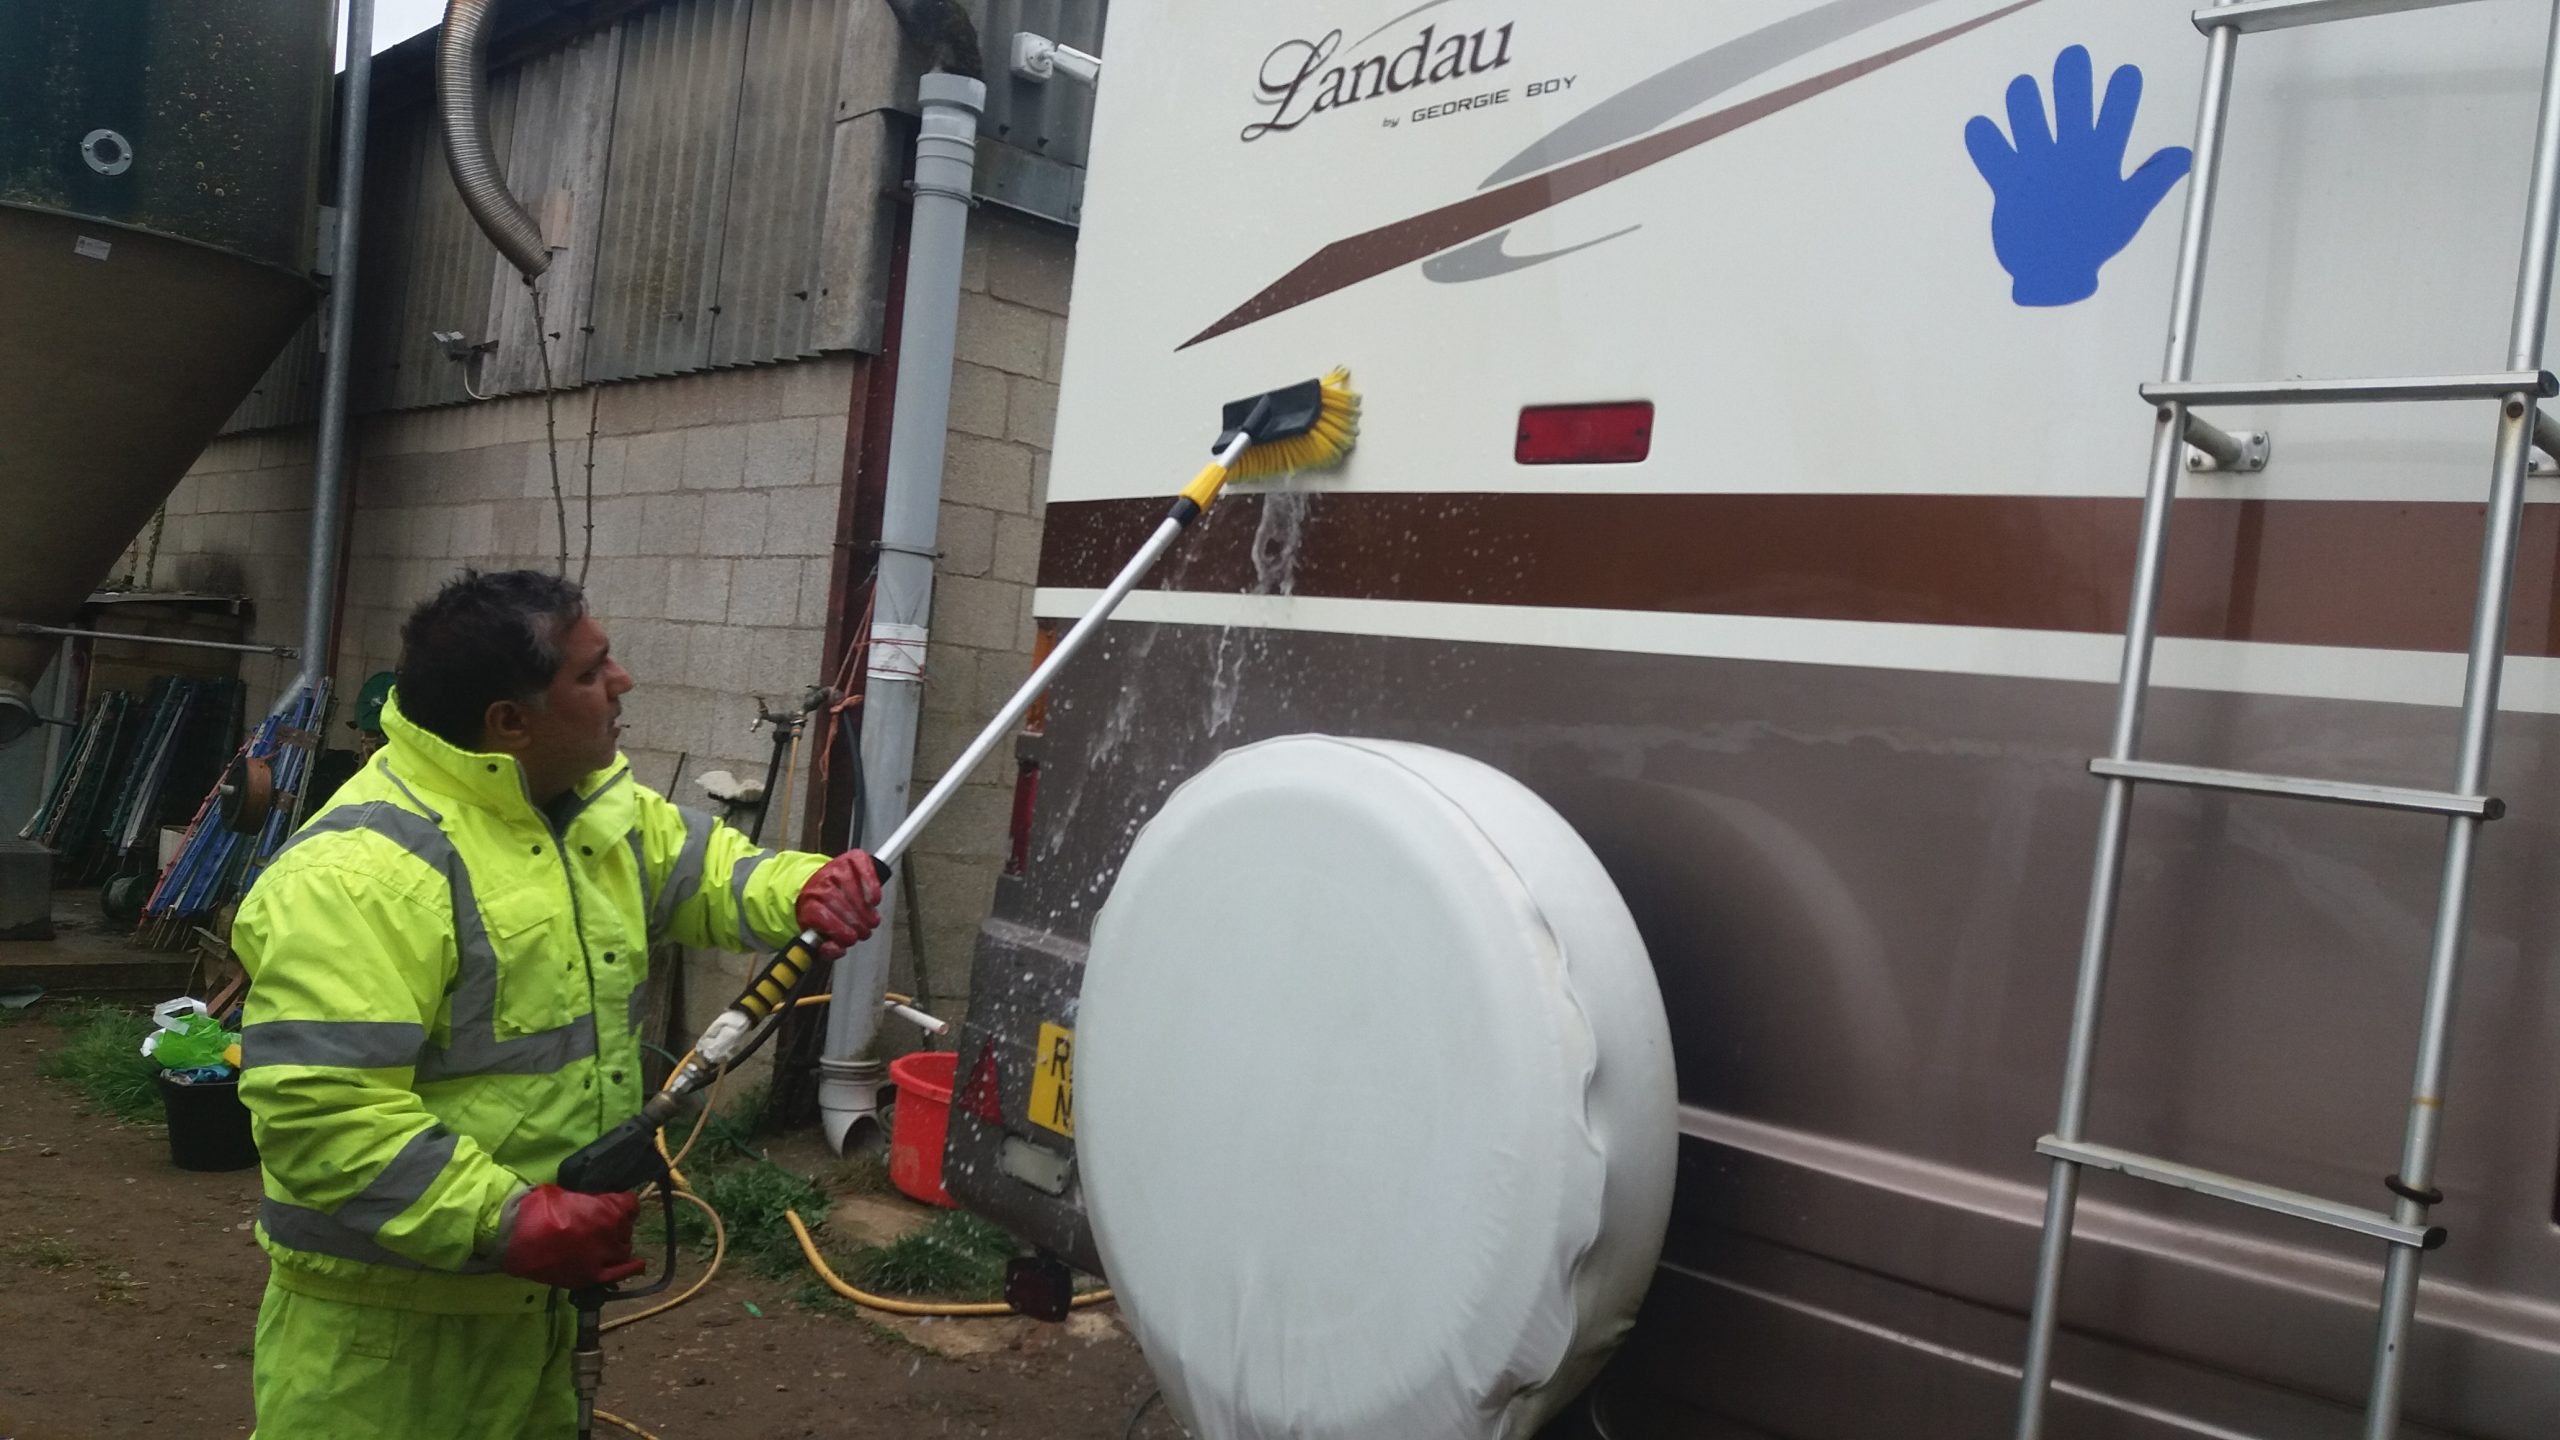 travel trailer cleaning service near me